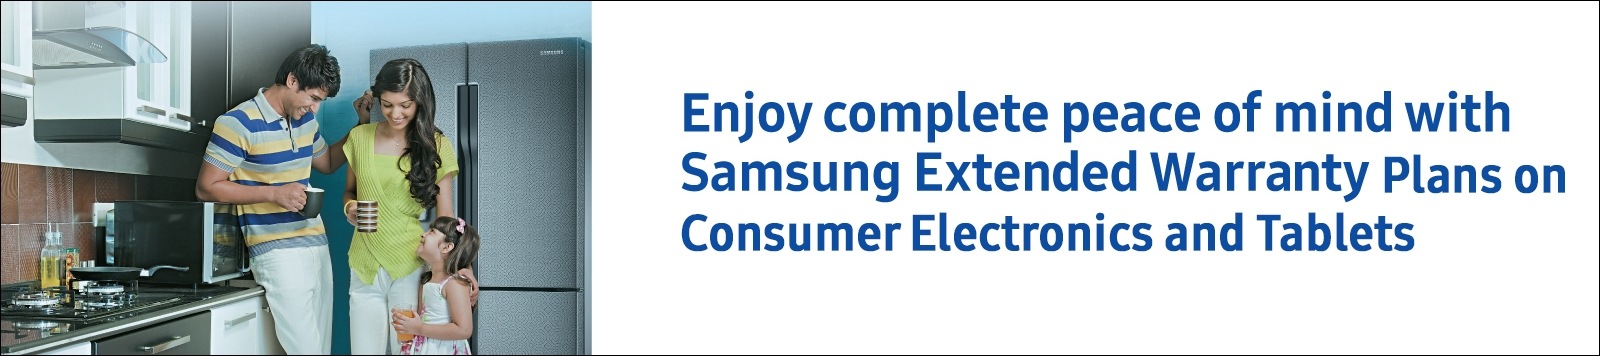 extended-warranty-on-samsung-home-appliances-samsung-india